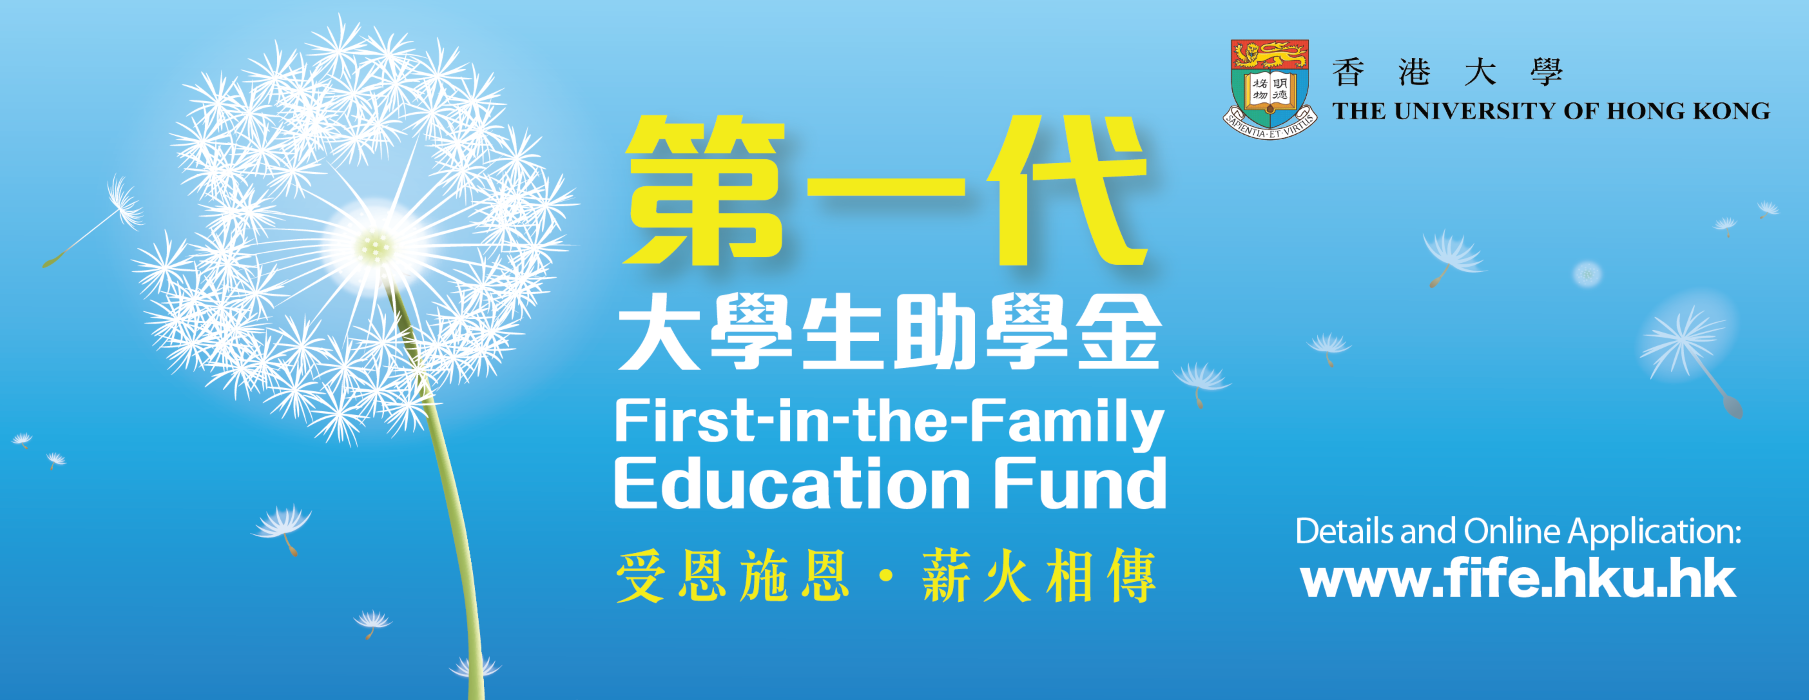 First-in-the-Family Education Fund 第一代大學生助學金